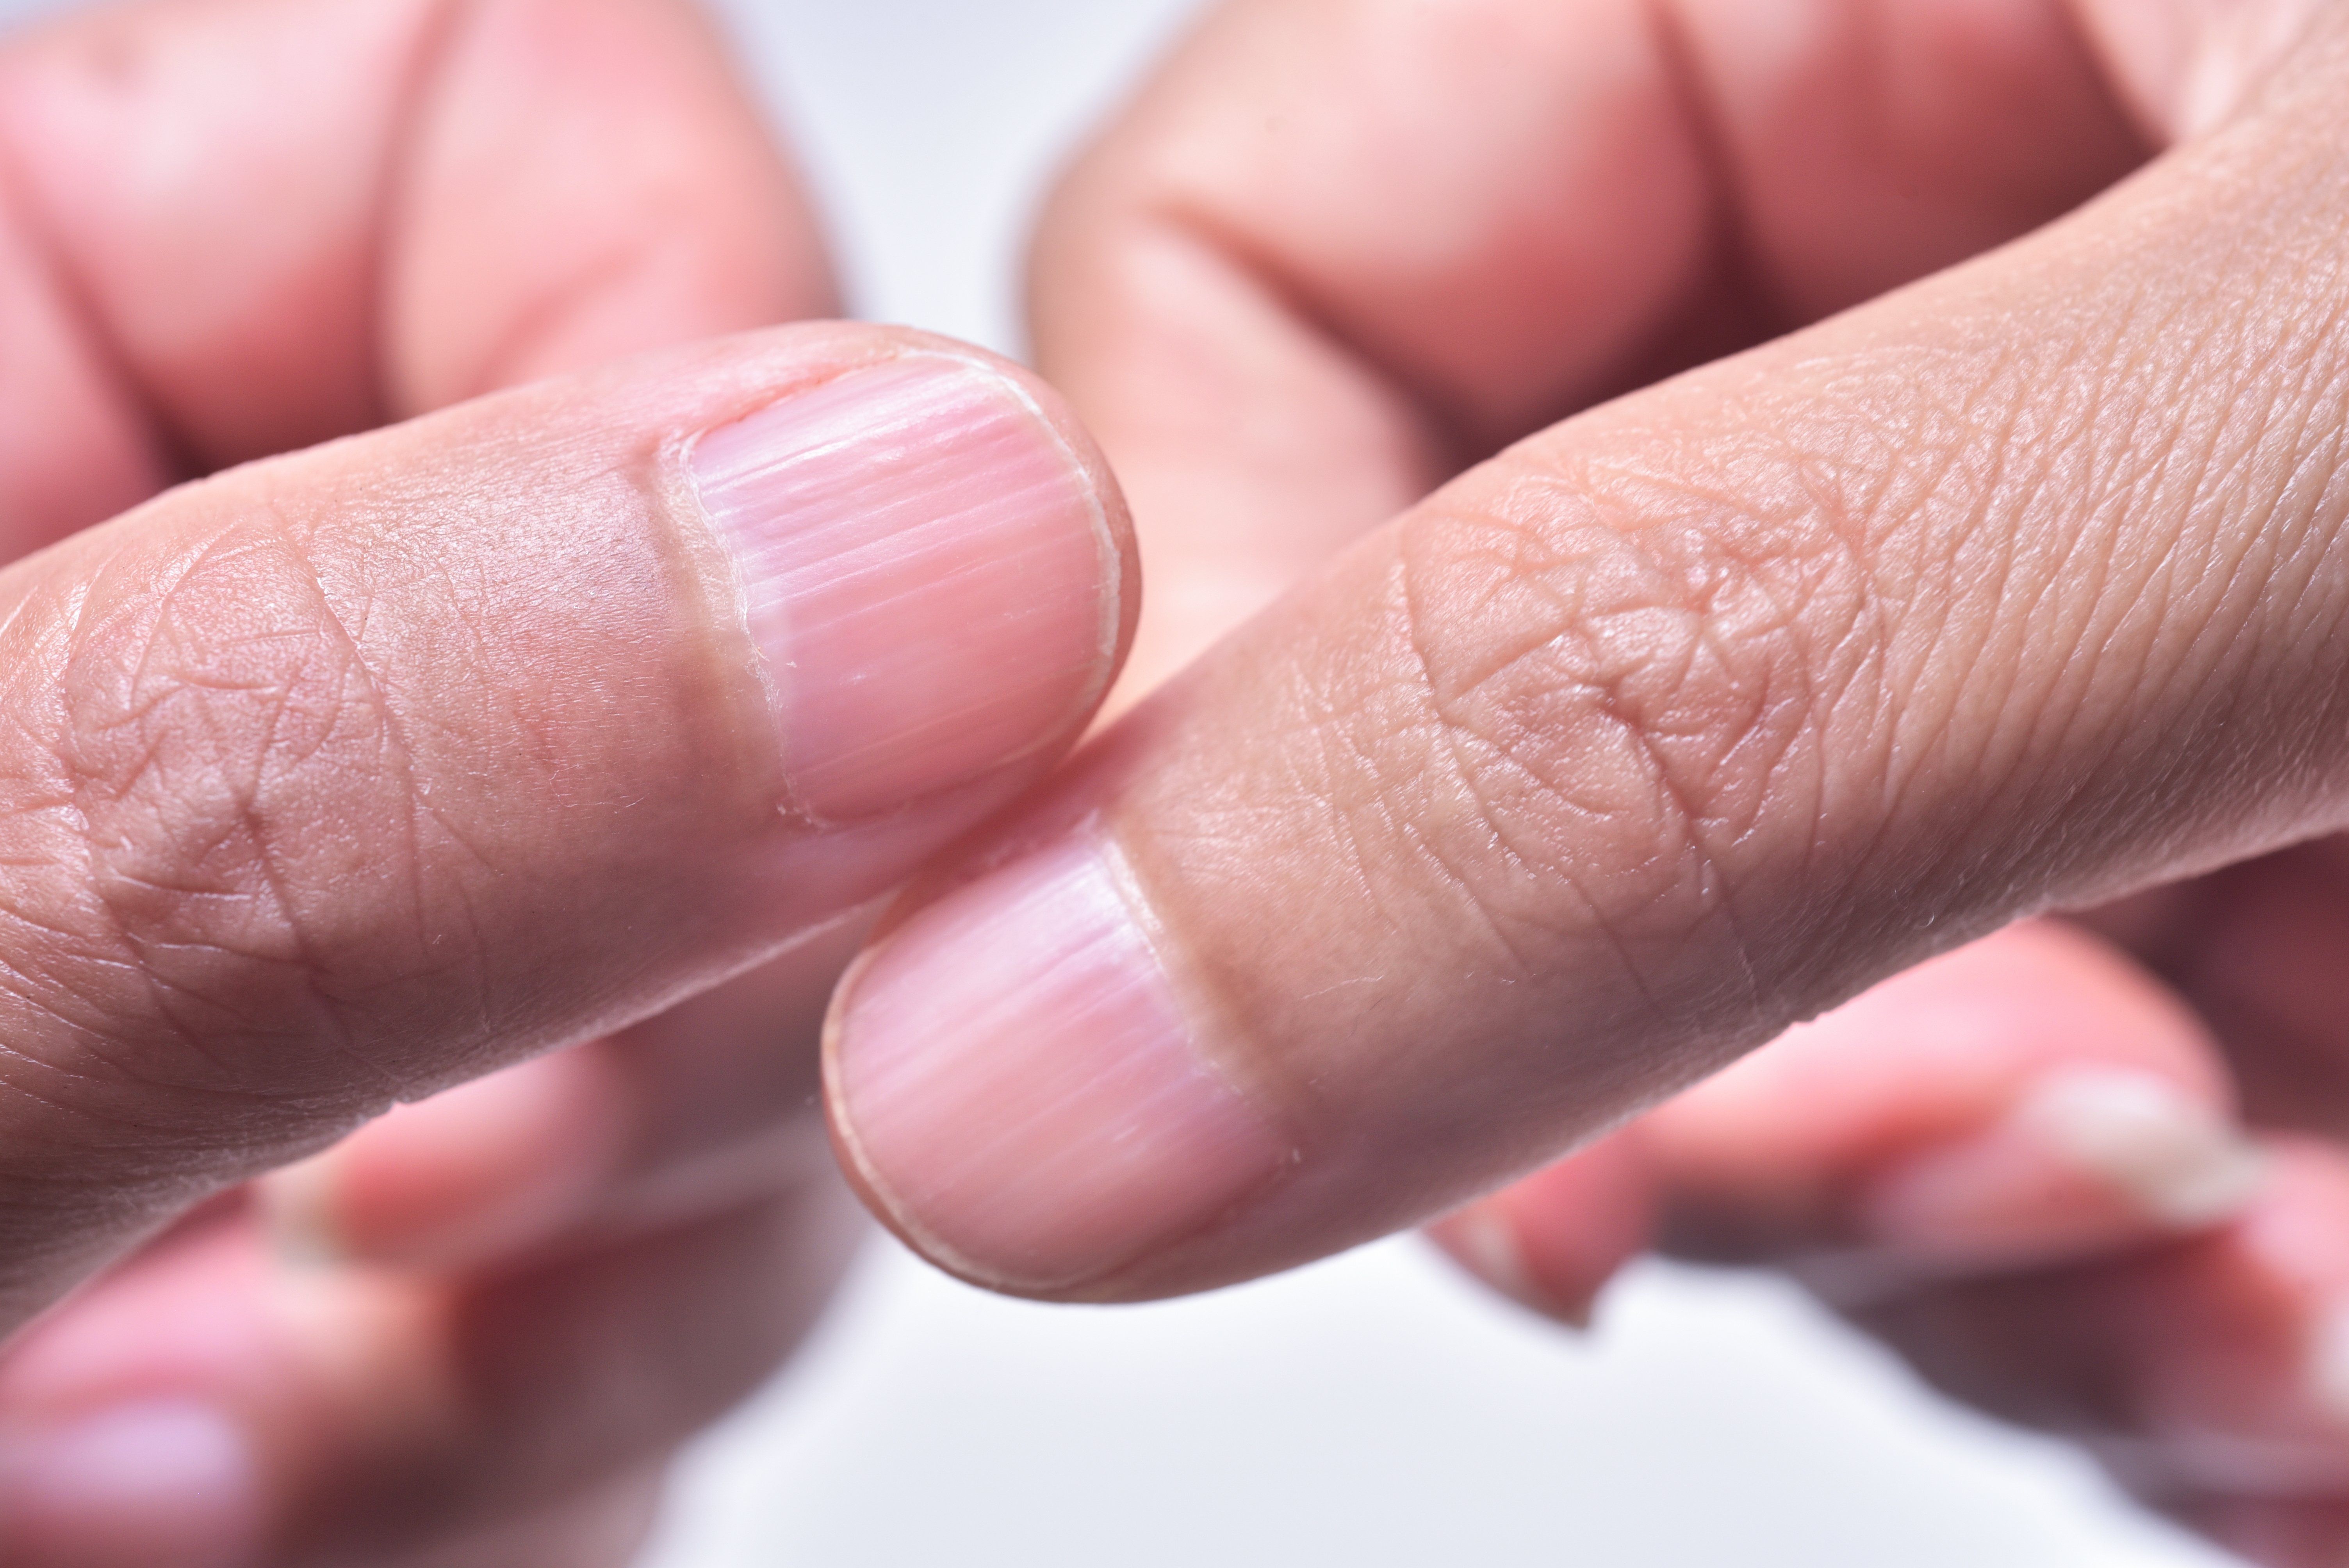 Tips on treating nail problems